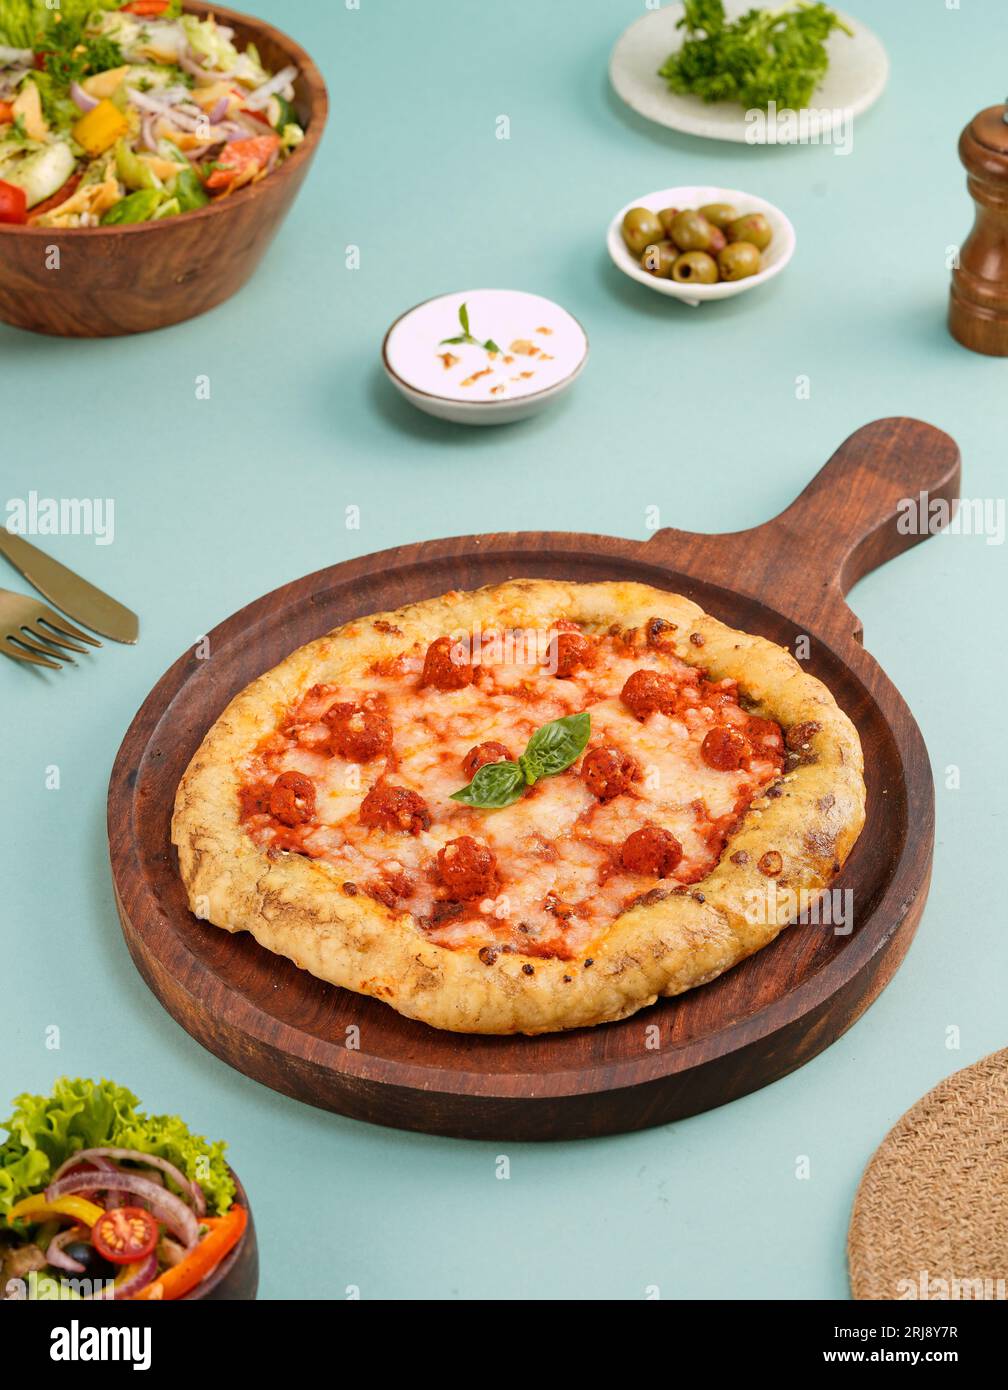 A close-up image of a freshly made pizza on a wooden board alongside other assorted dishes Stock Photo